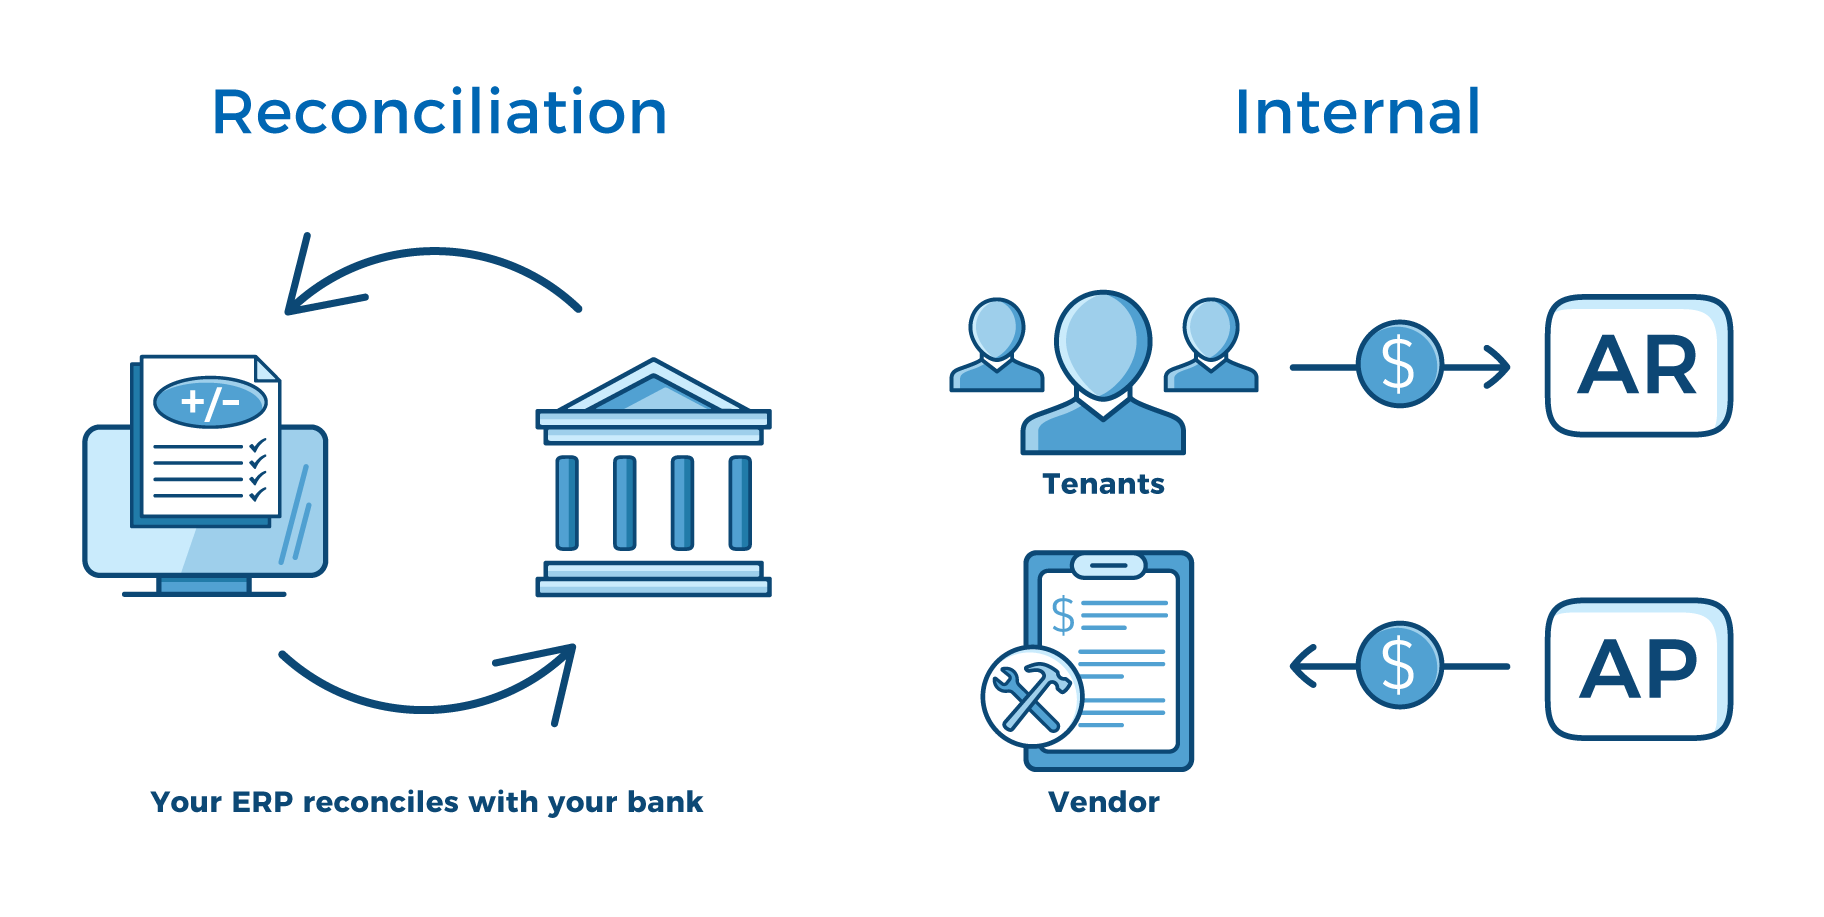 account reconciliation and internal graphic